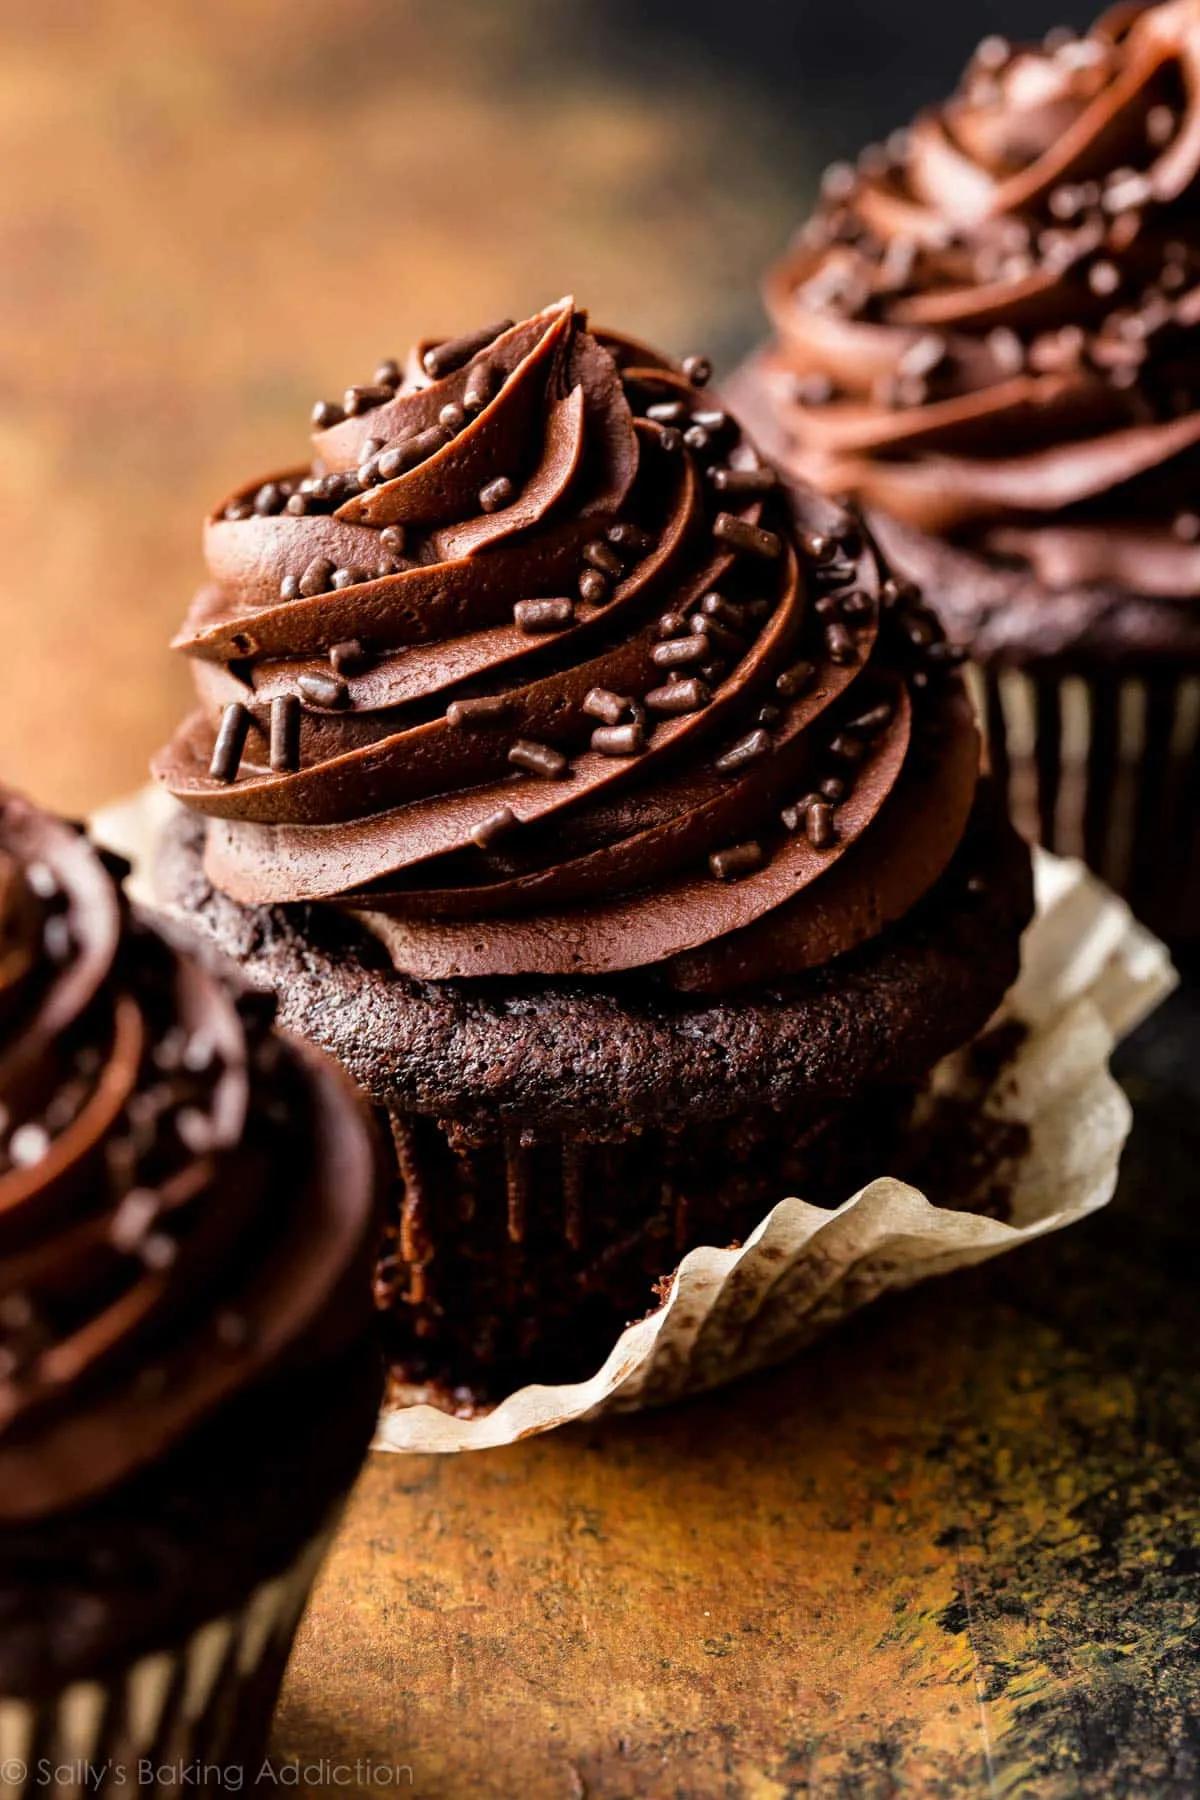 Best Sallys Baking Addiction Chocolate Cupcakes Collections – Easy ...